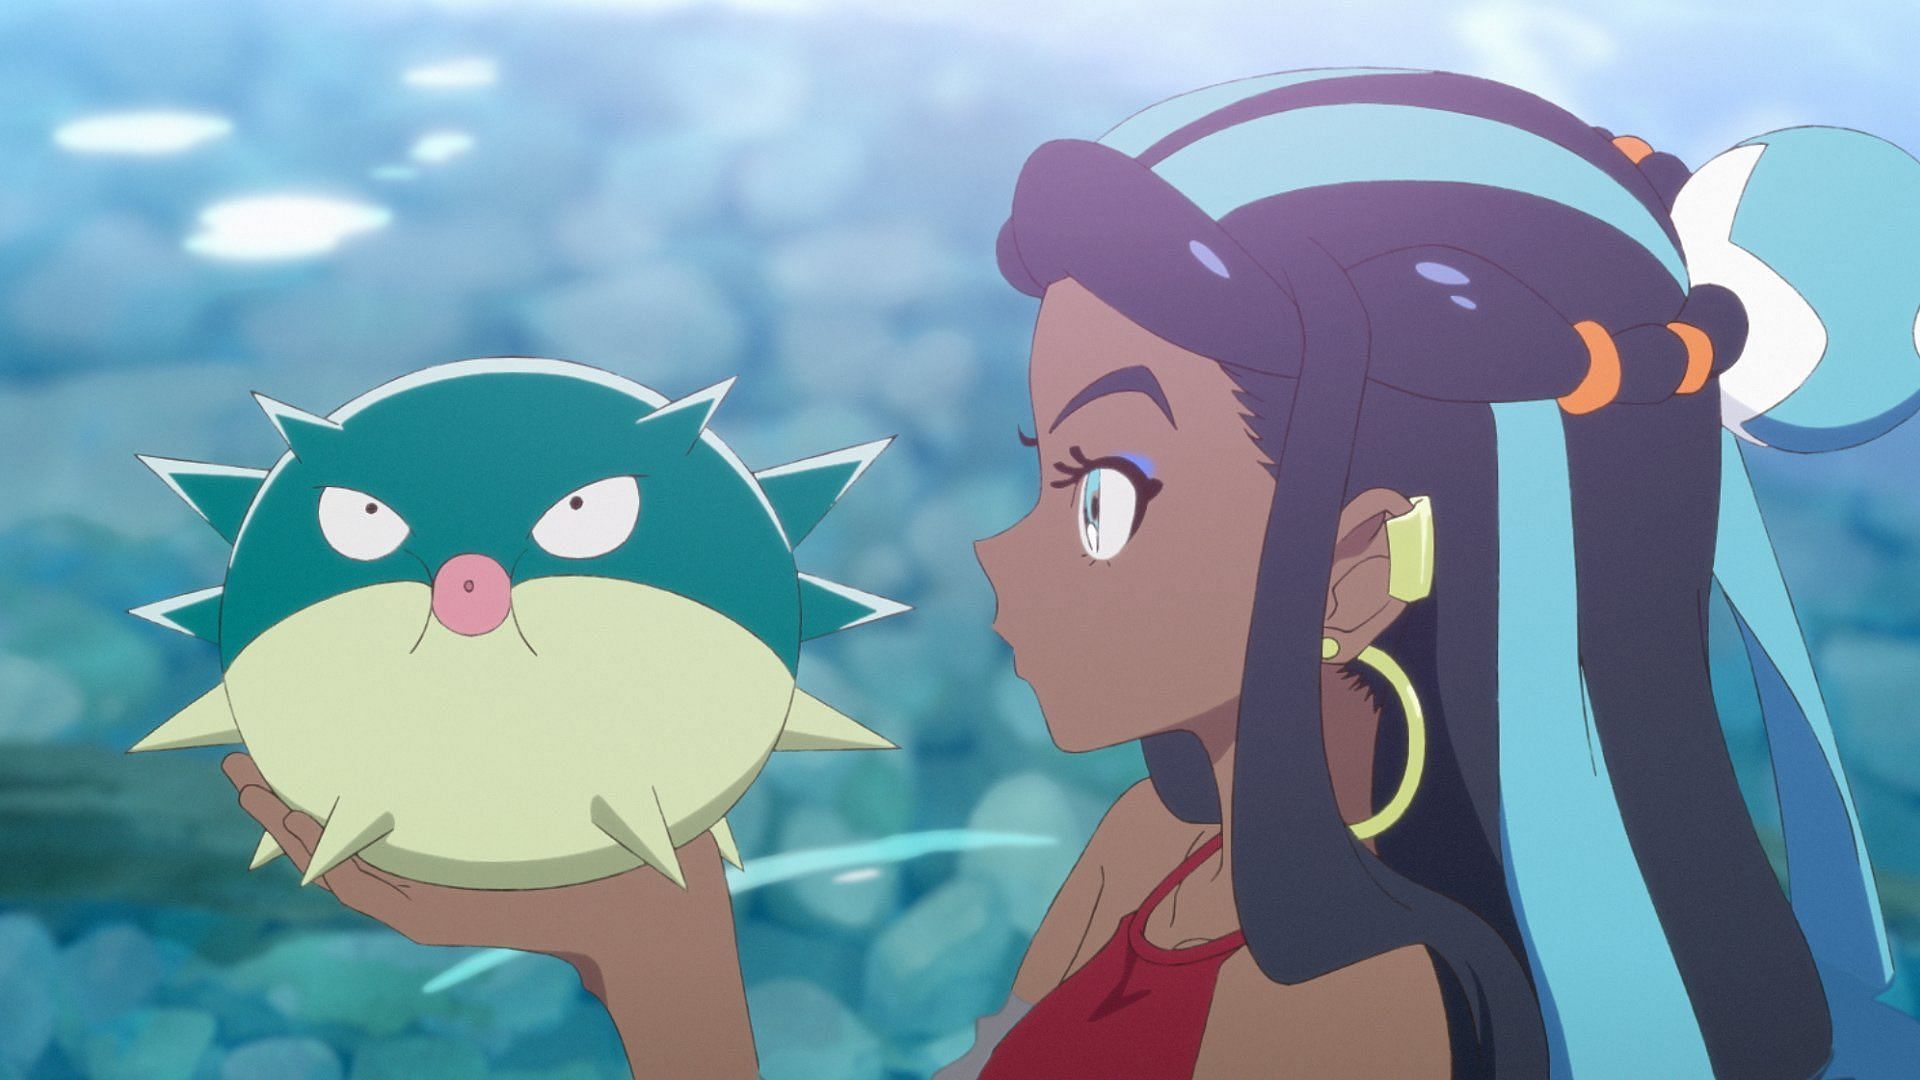 Fans loved Nessa since she first appeared on screen (Image credit: OLM Incorporated, Pokemon: Twilight wings)